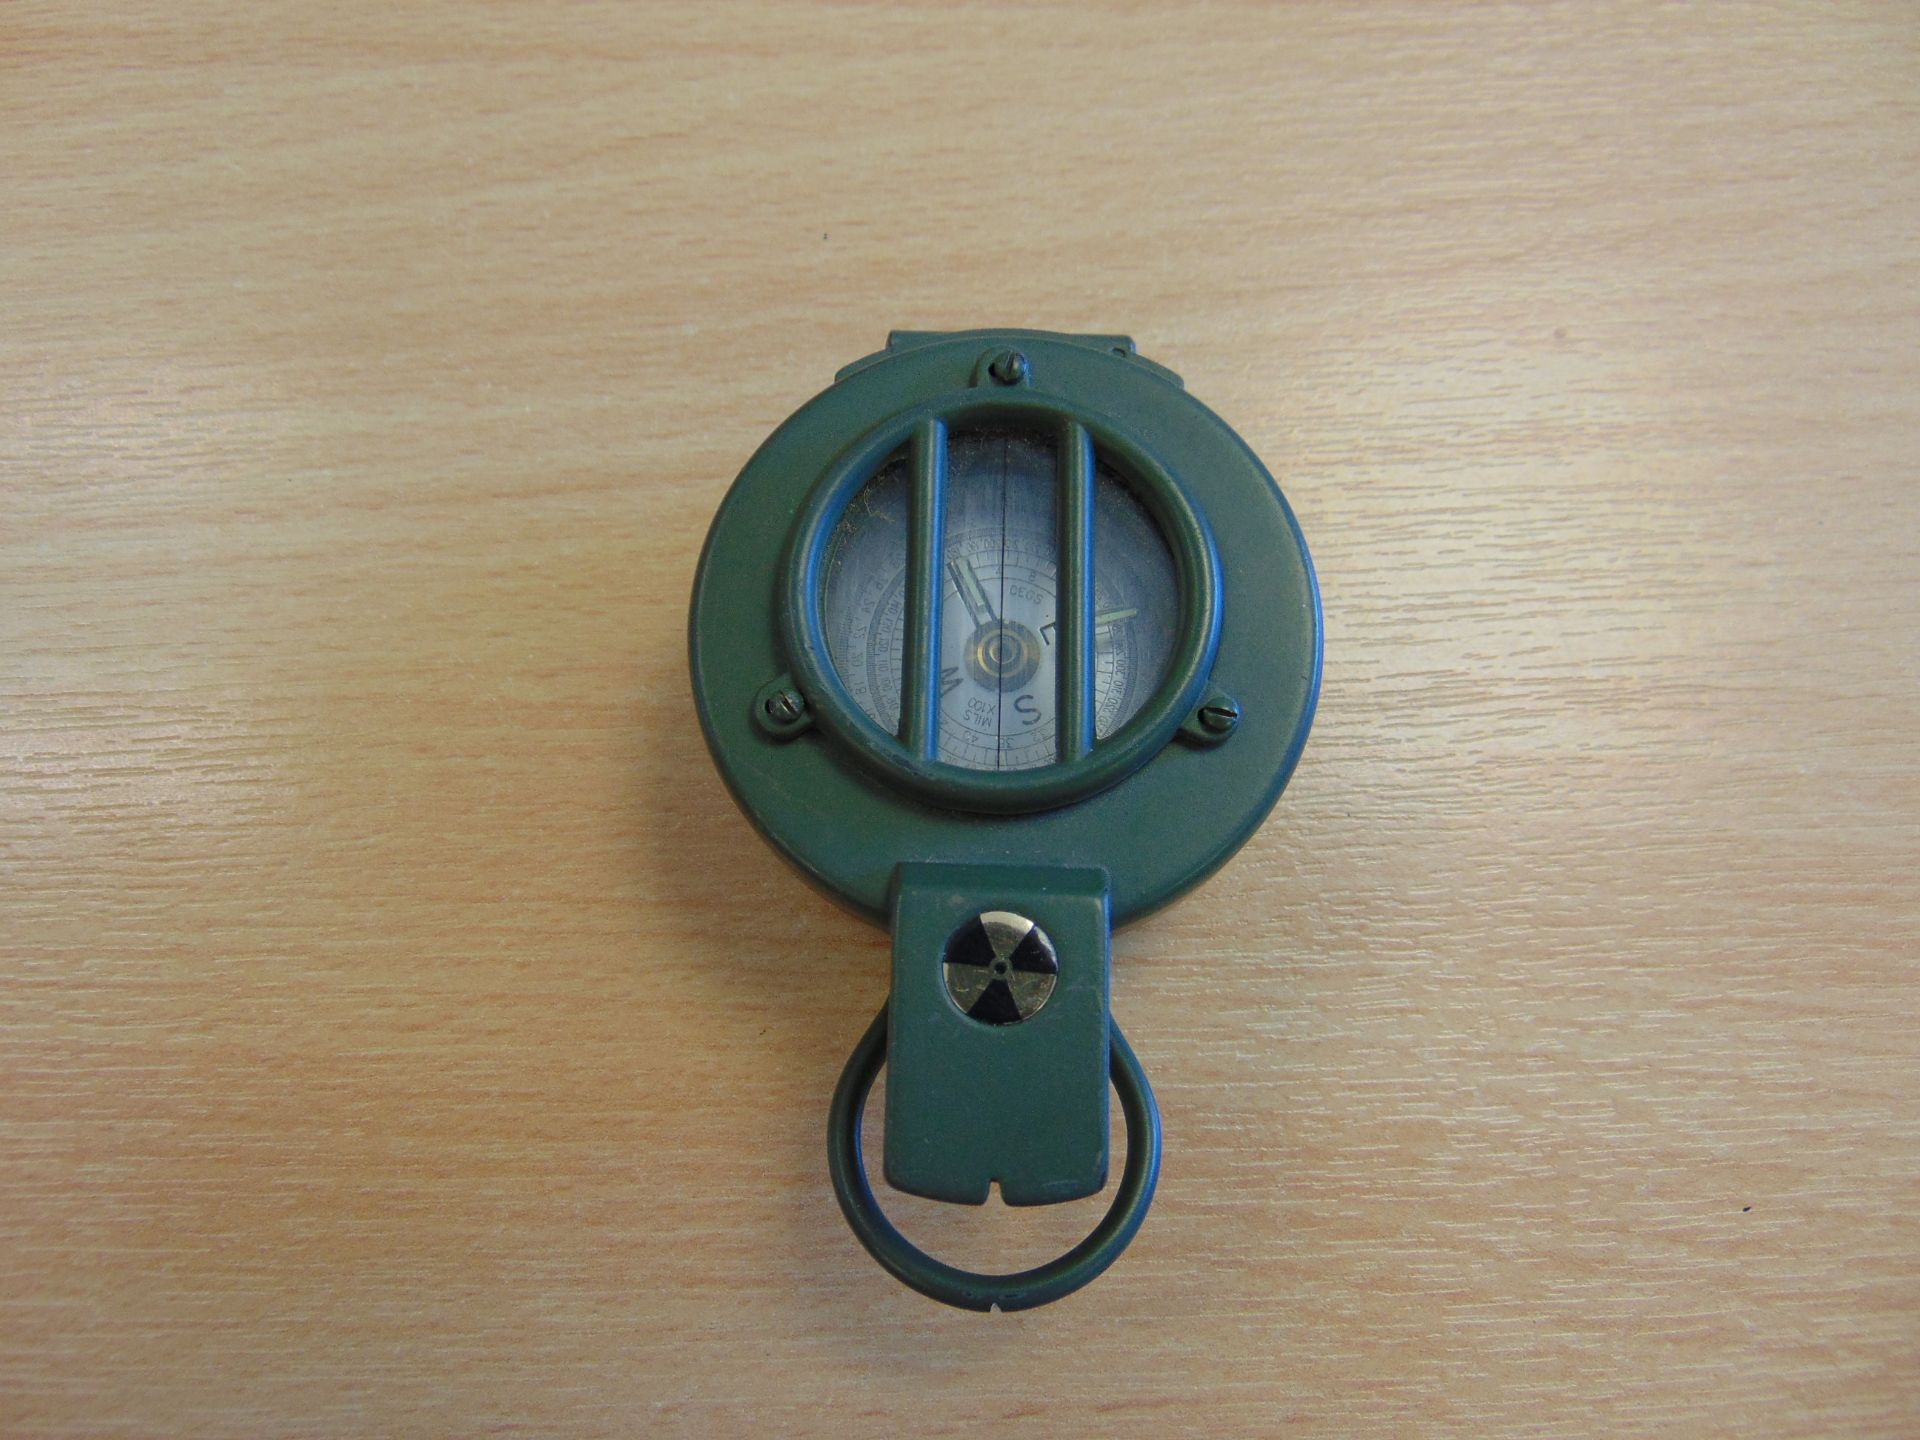 British Army Francis Barker M88 Prismatic Compass in Mils, Unissued Condition - Image 2 of 3